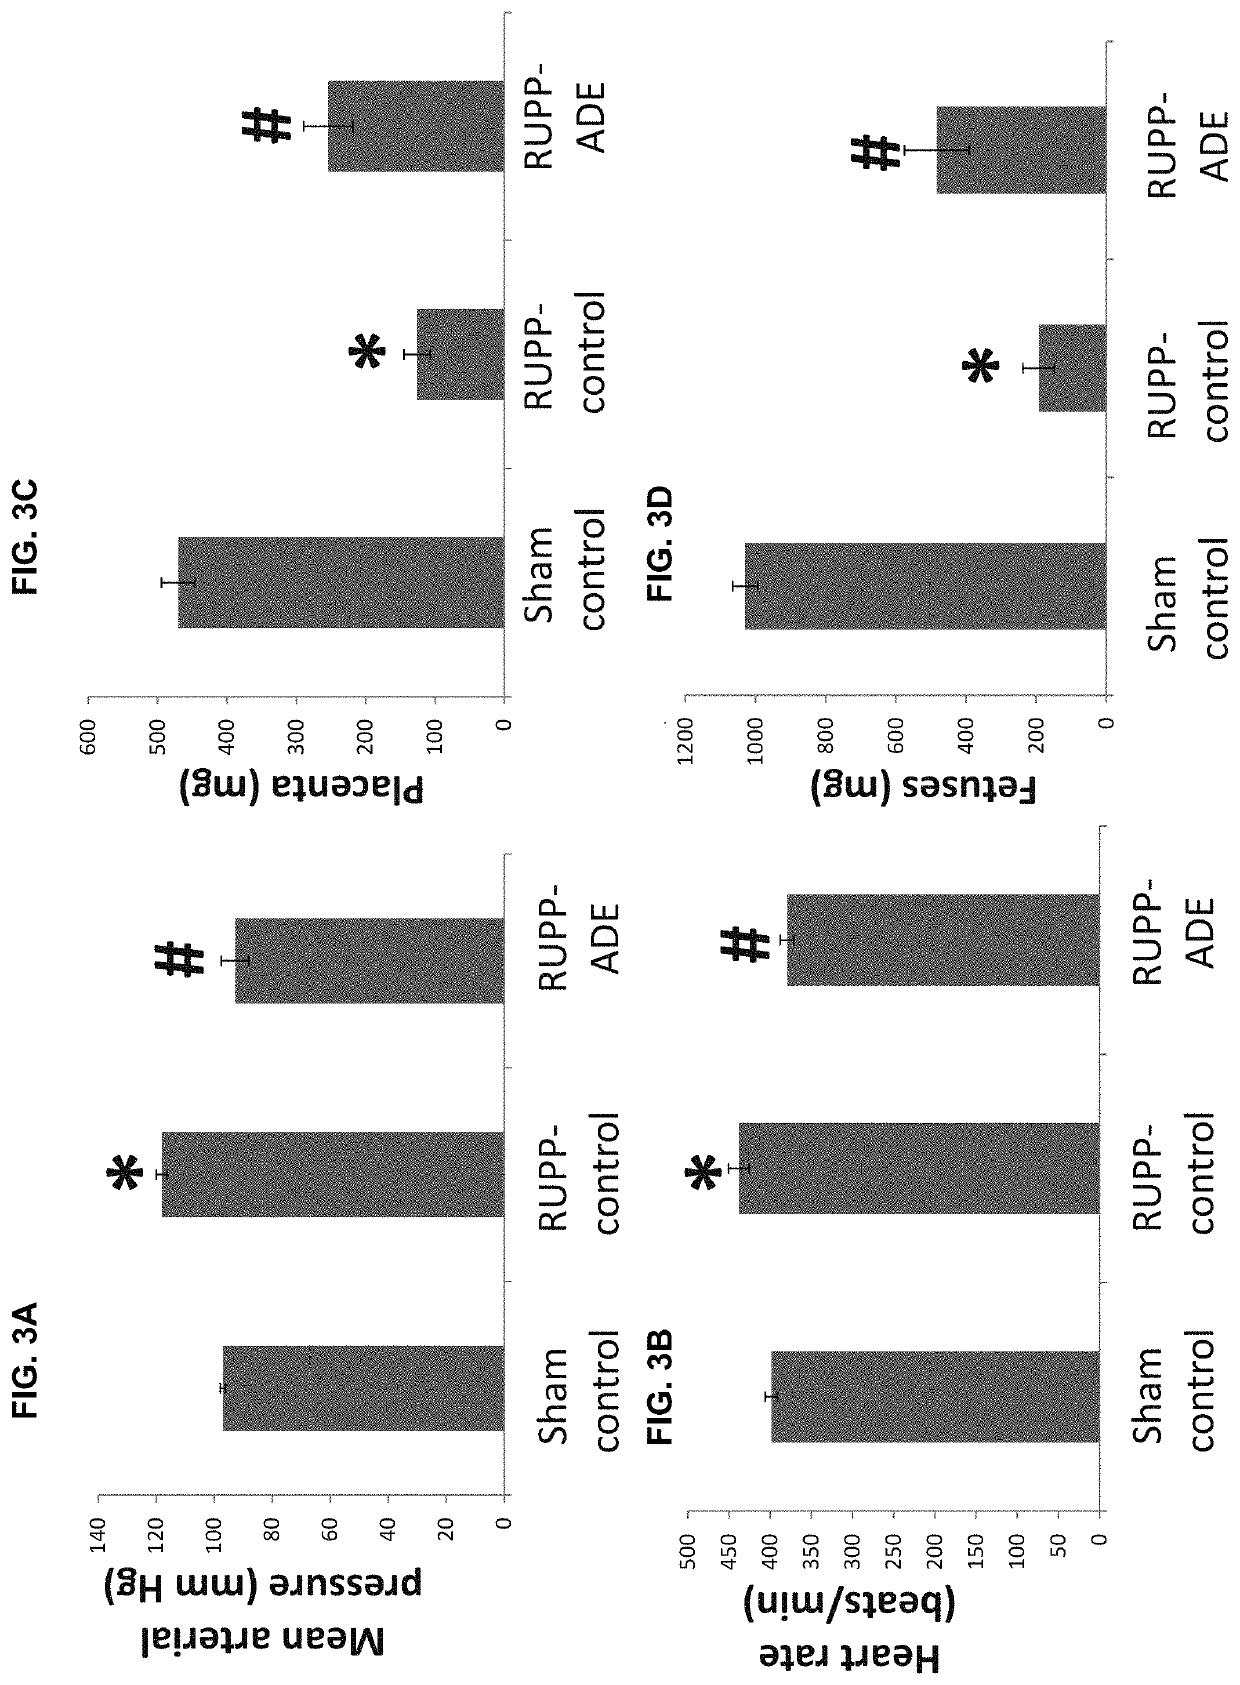 Dosing and use of long-acting clr/ramp agonists